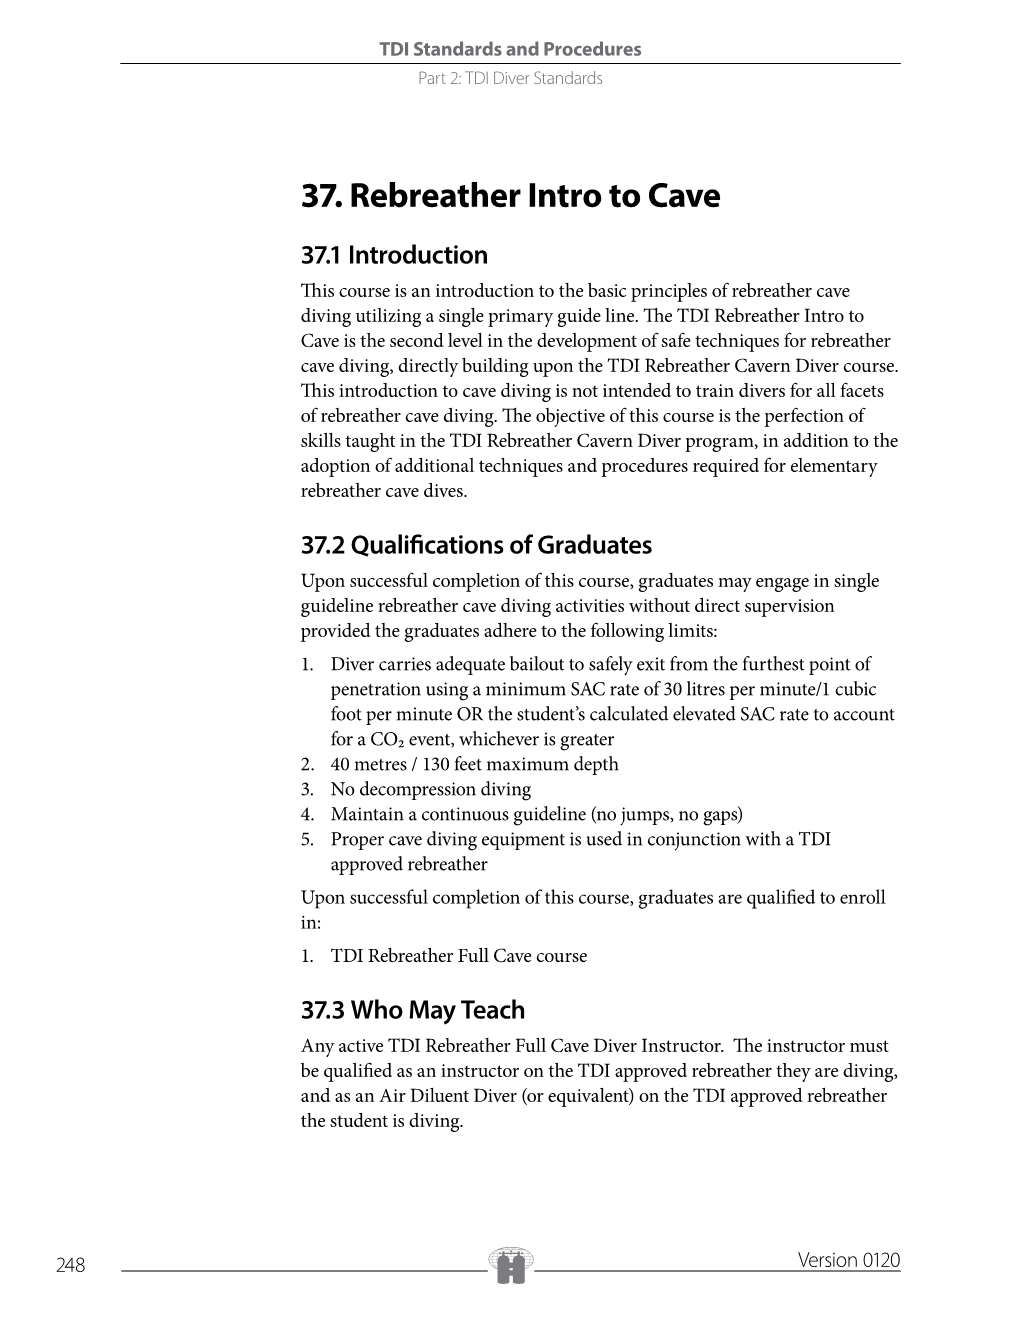 37. Rebreather Intro to Cave